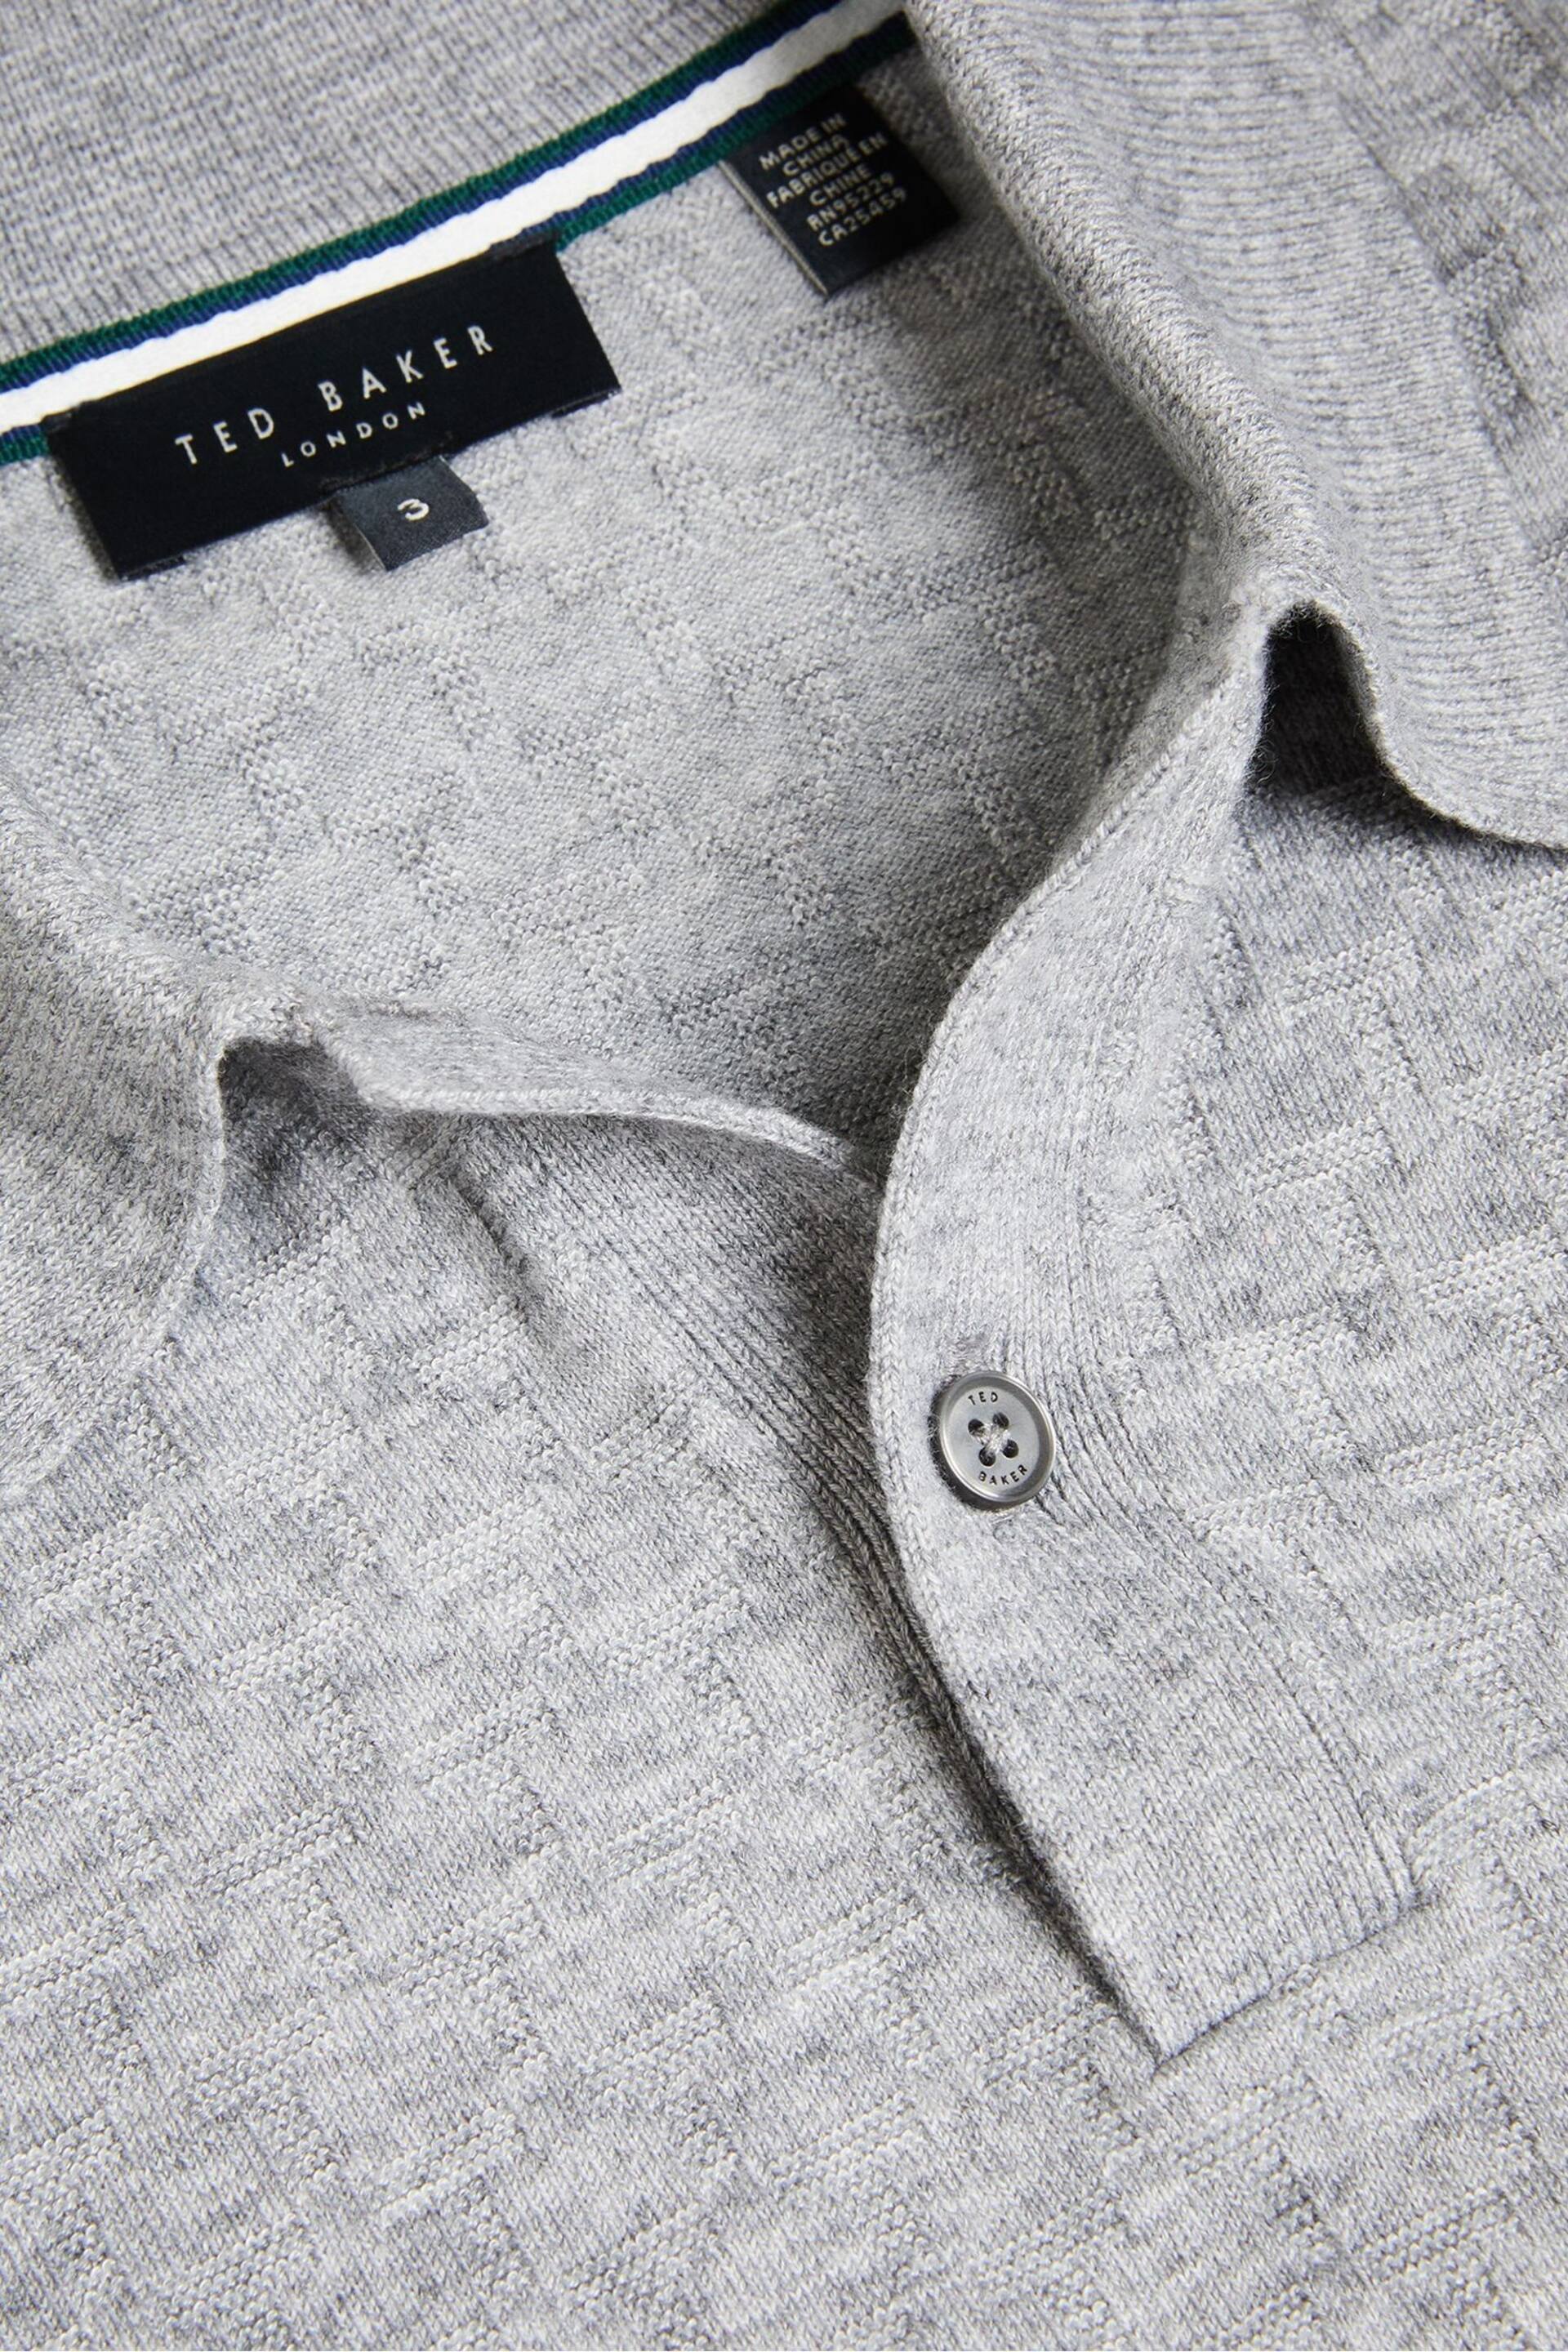 Ted Baker Grey Morar Stitch Knitted Polo Shirt - Image 6 of 7